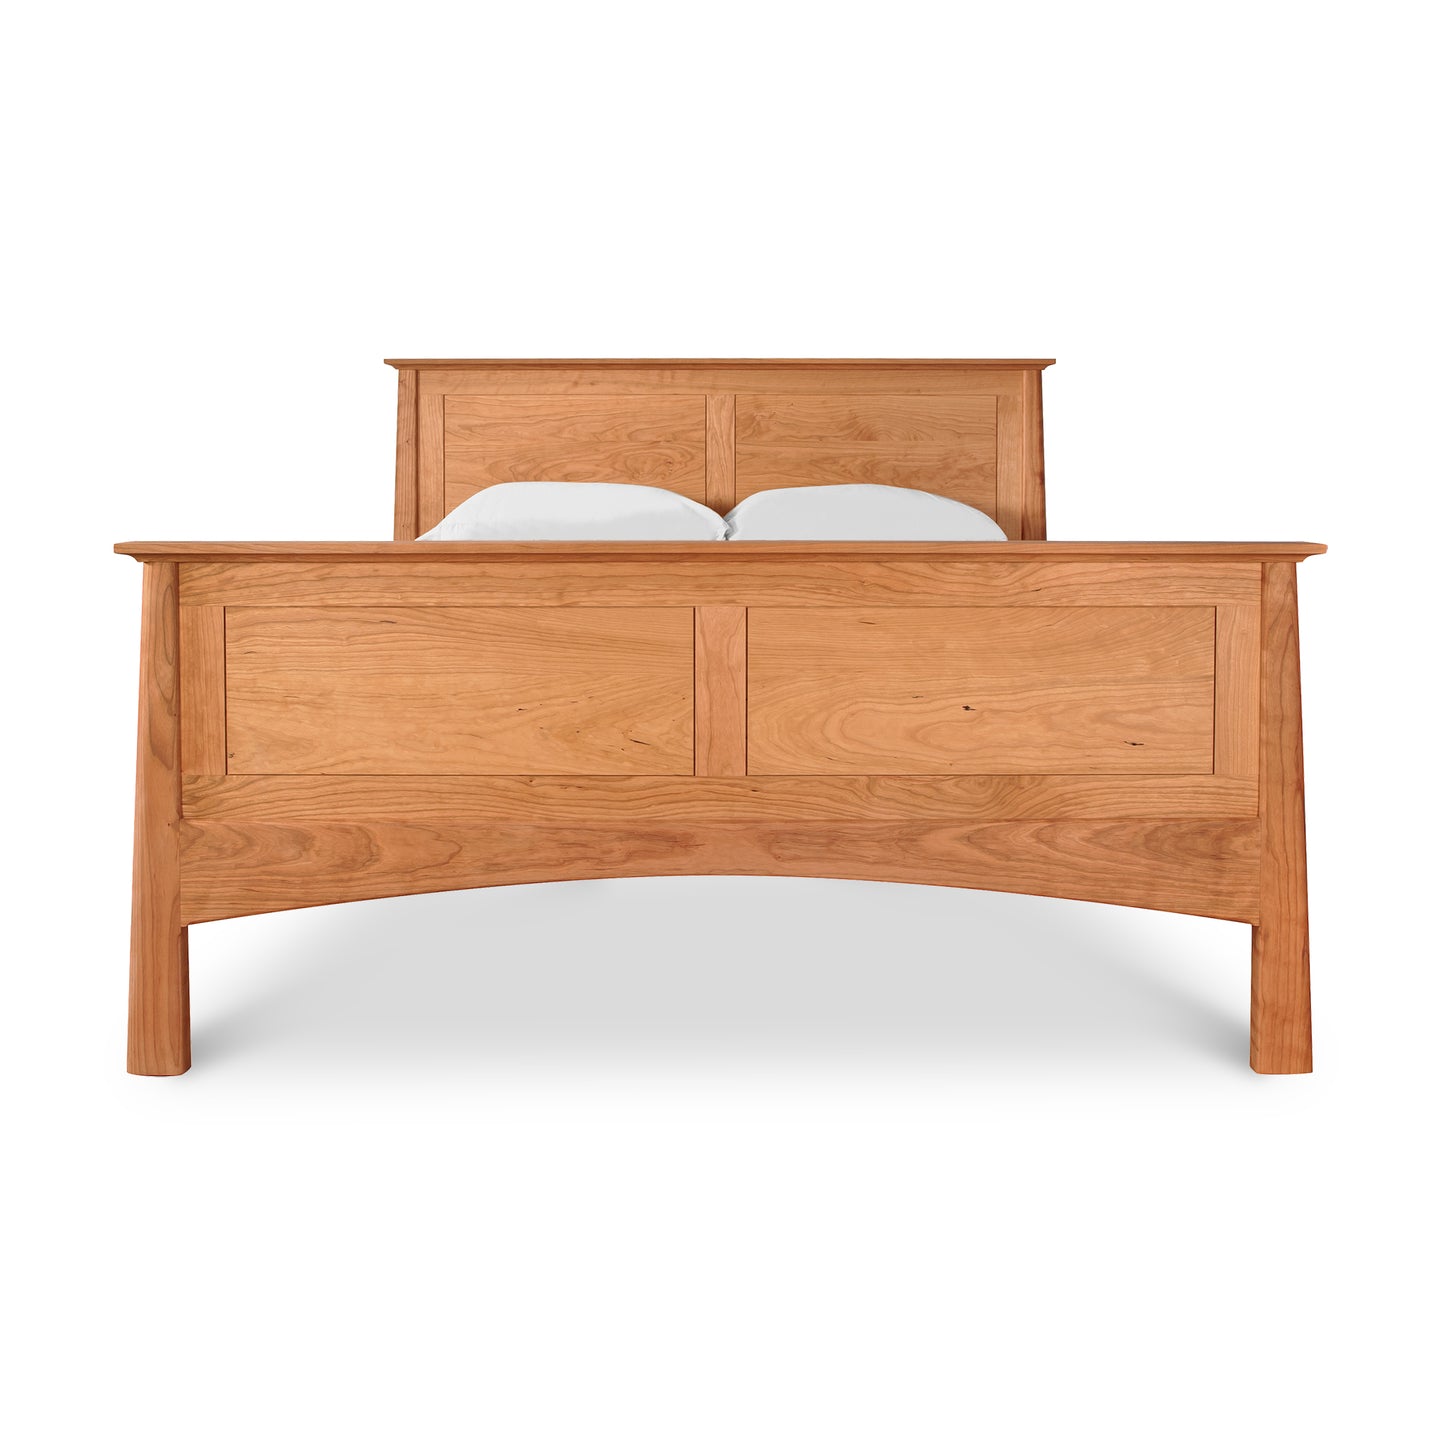 A Maple Corner Woodworks Cherry Moon Panel Bed with a curved headboard and two white pillows, isolated against a white background. The bed features distinct wood grain patterns and a footboard.